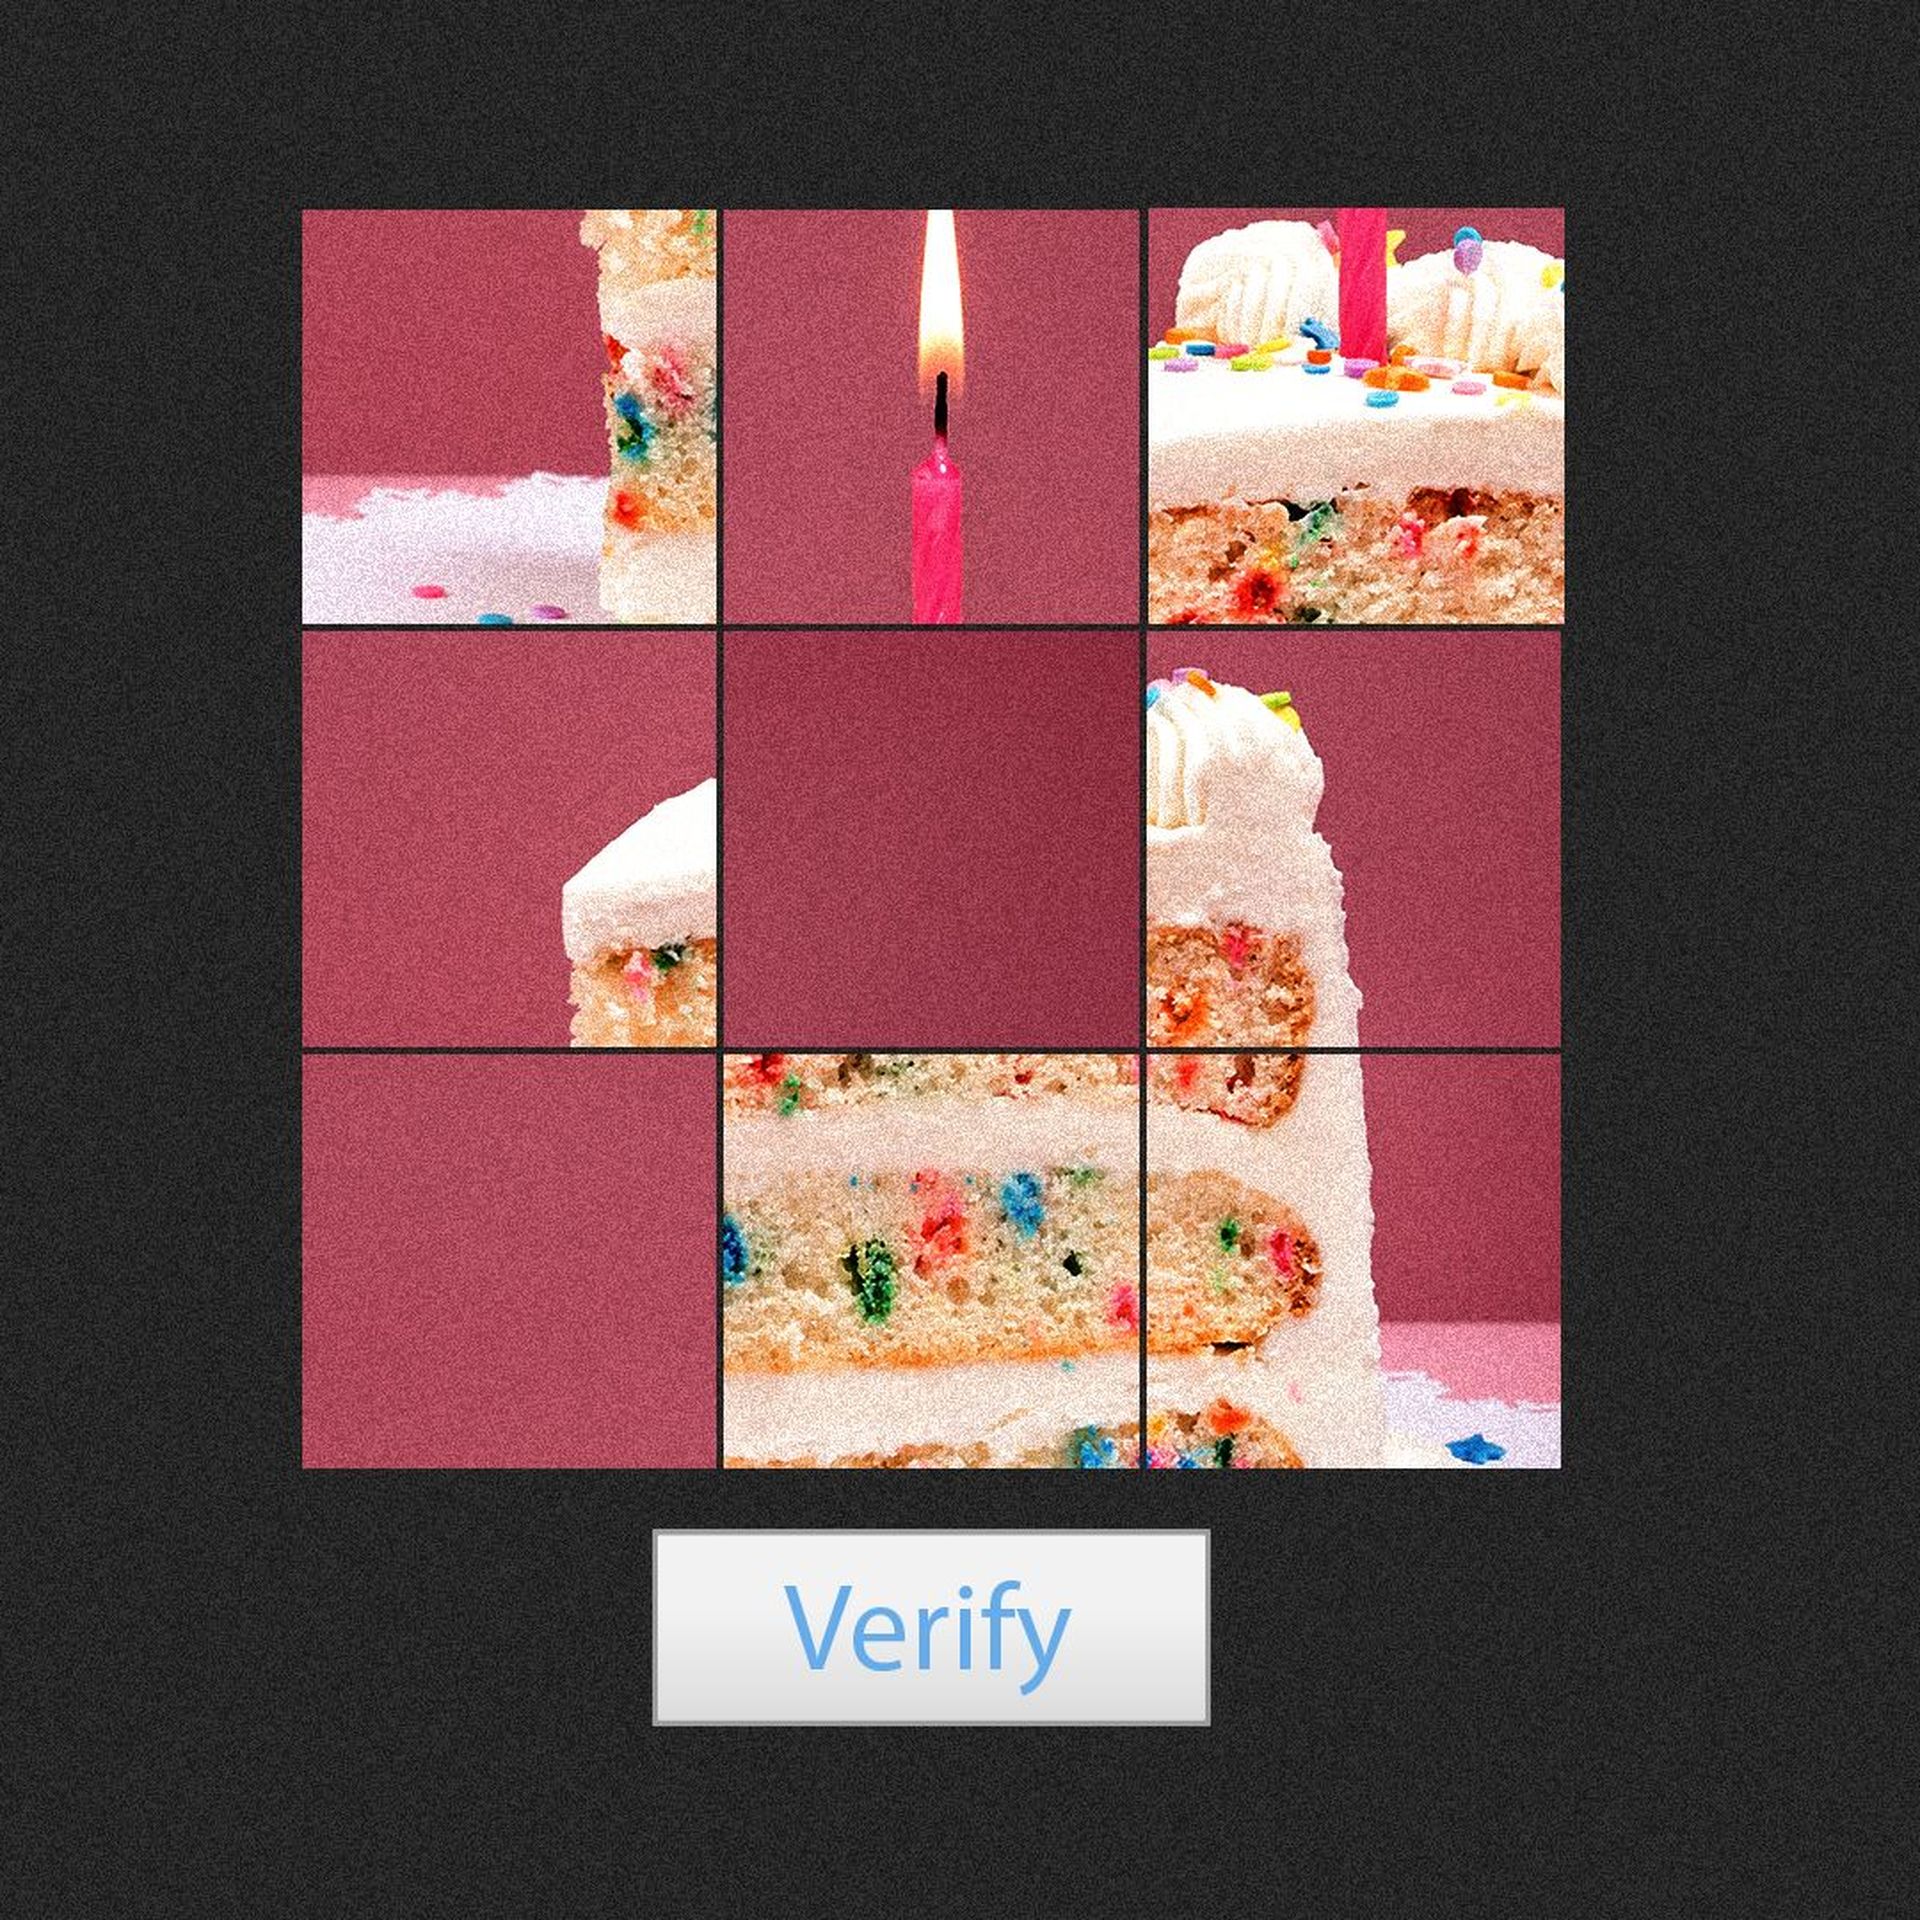 Illustration of a captcha prompt showing a mixed up slice of birthday cake with a candle